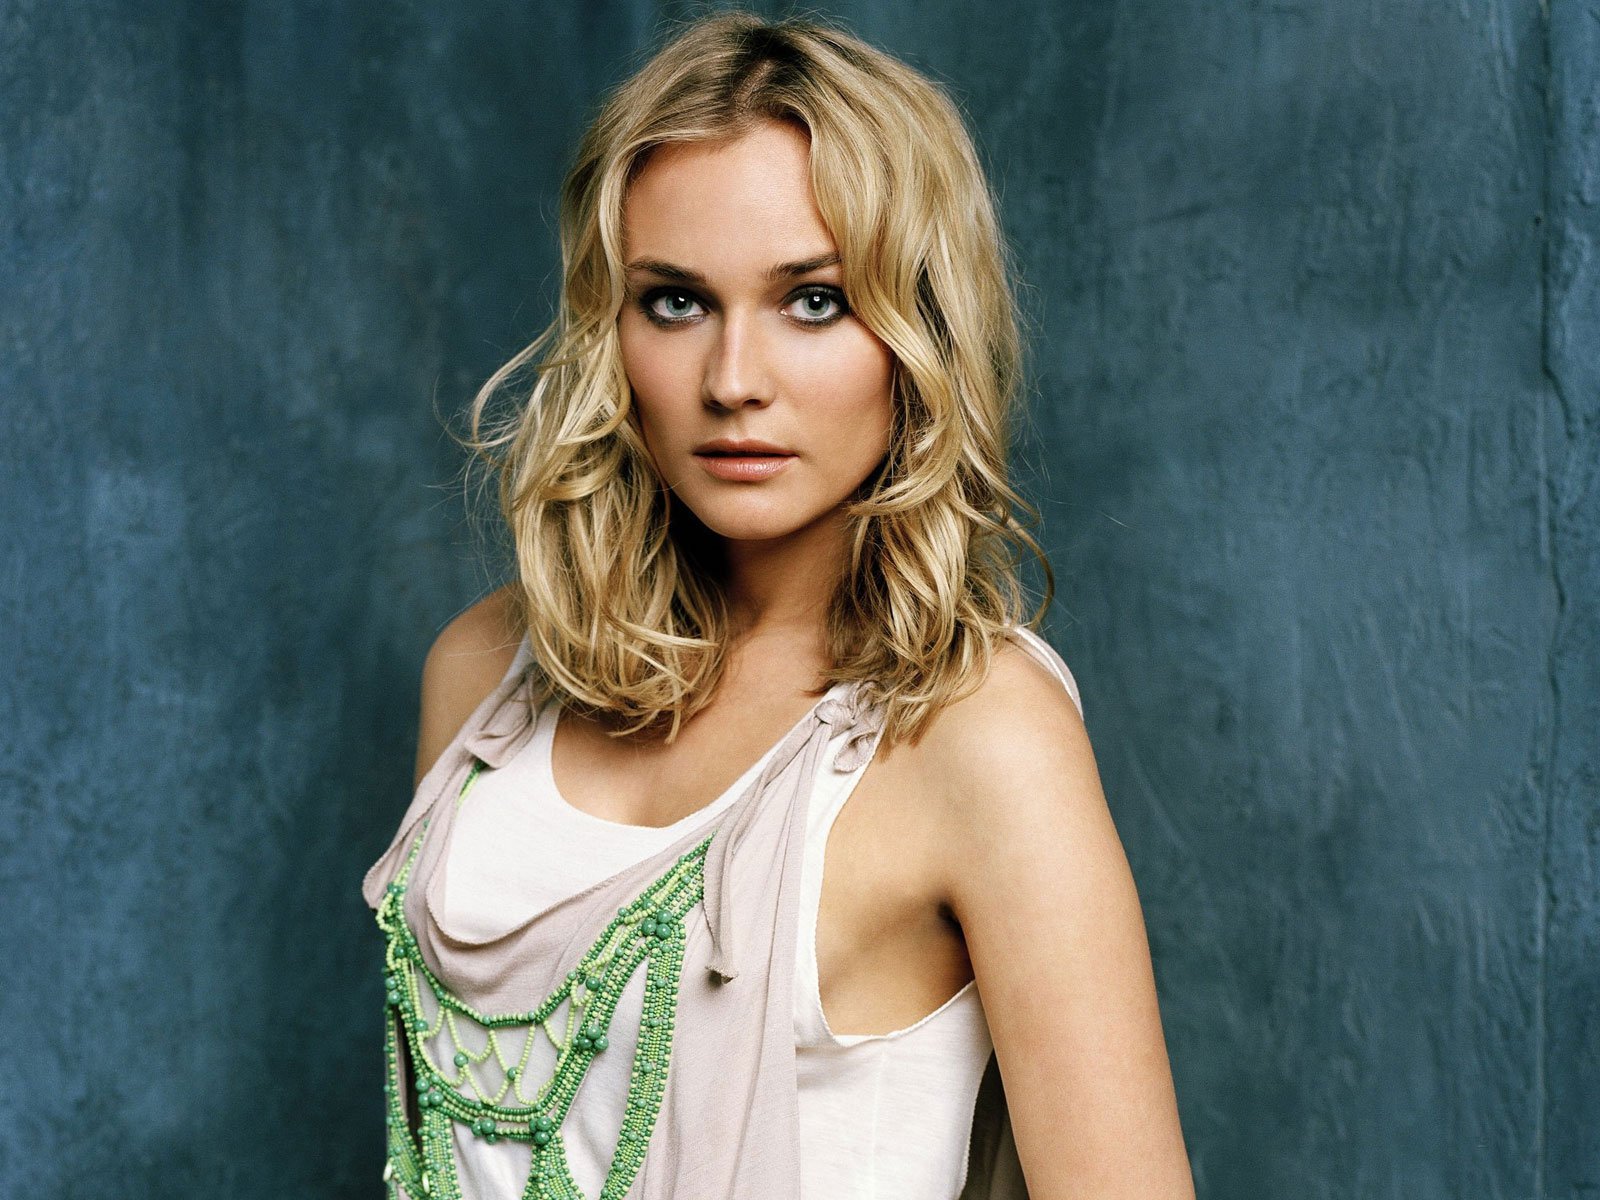 Diane Kruger photo 96 of 1759 pics, wallpaper - photo #398460 - ThePlace2